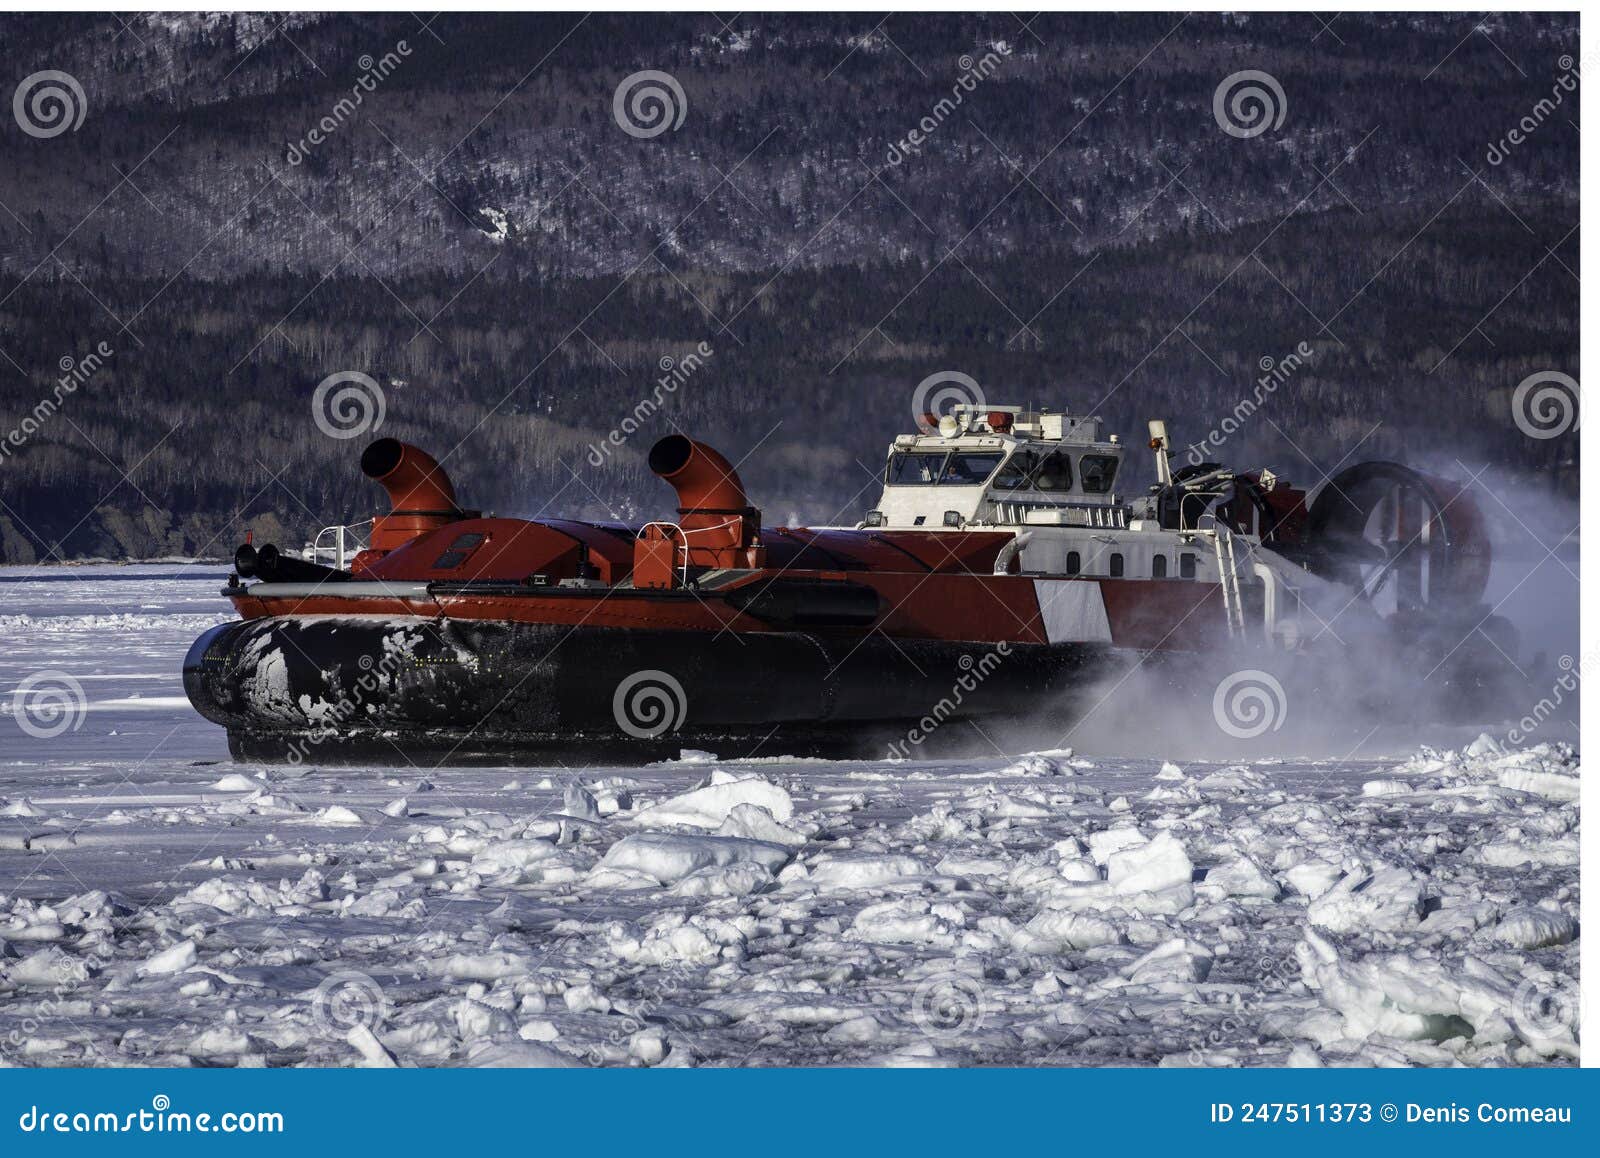 coast guard hovercraft breaking ice near a small community in eastern quebec, canada.